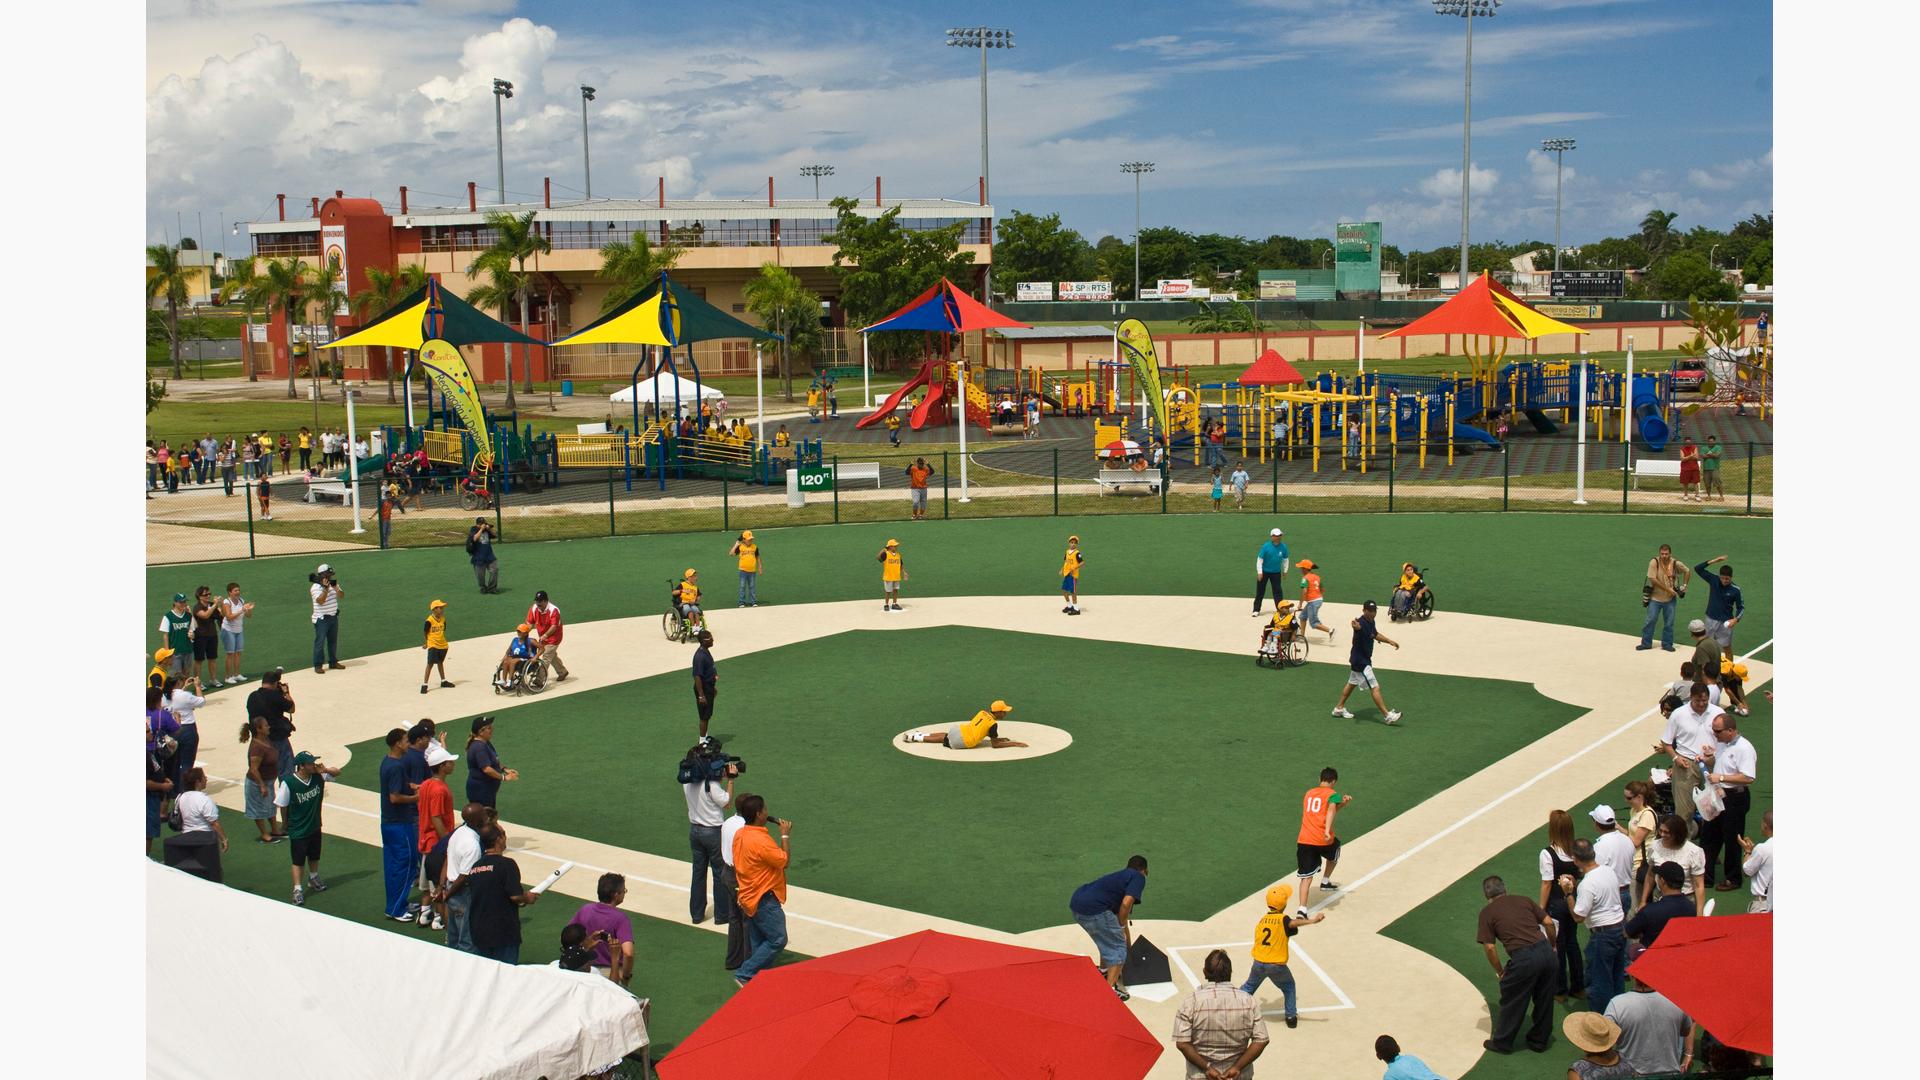 Parents and kids on baseball field playing a lively game. Large, colorful playground with shade and many ramps in background. Lots of slides and equipment as kids play all around.